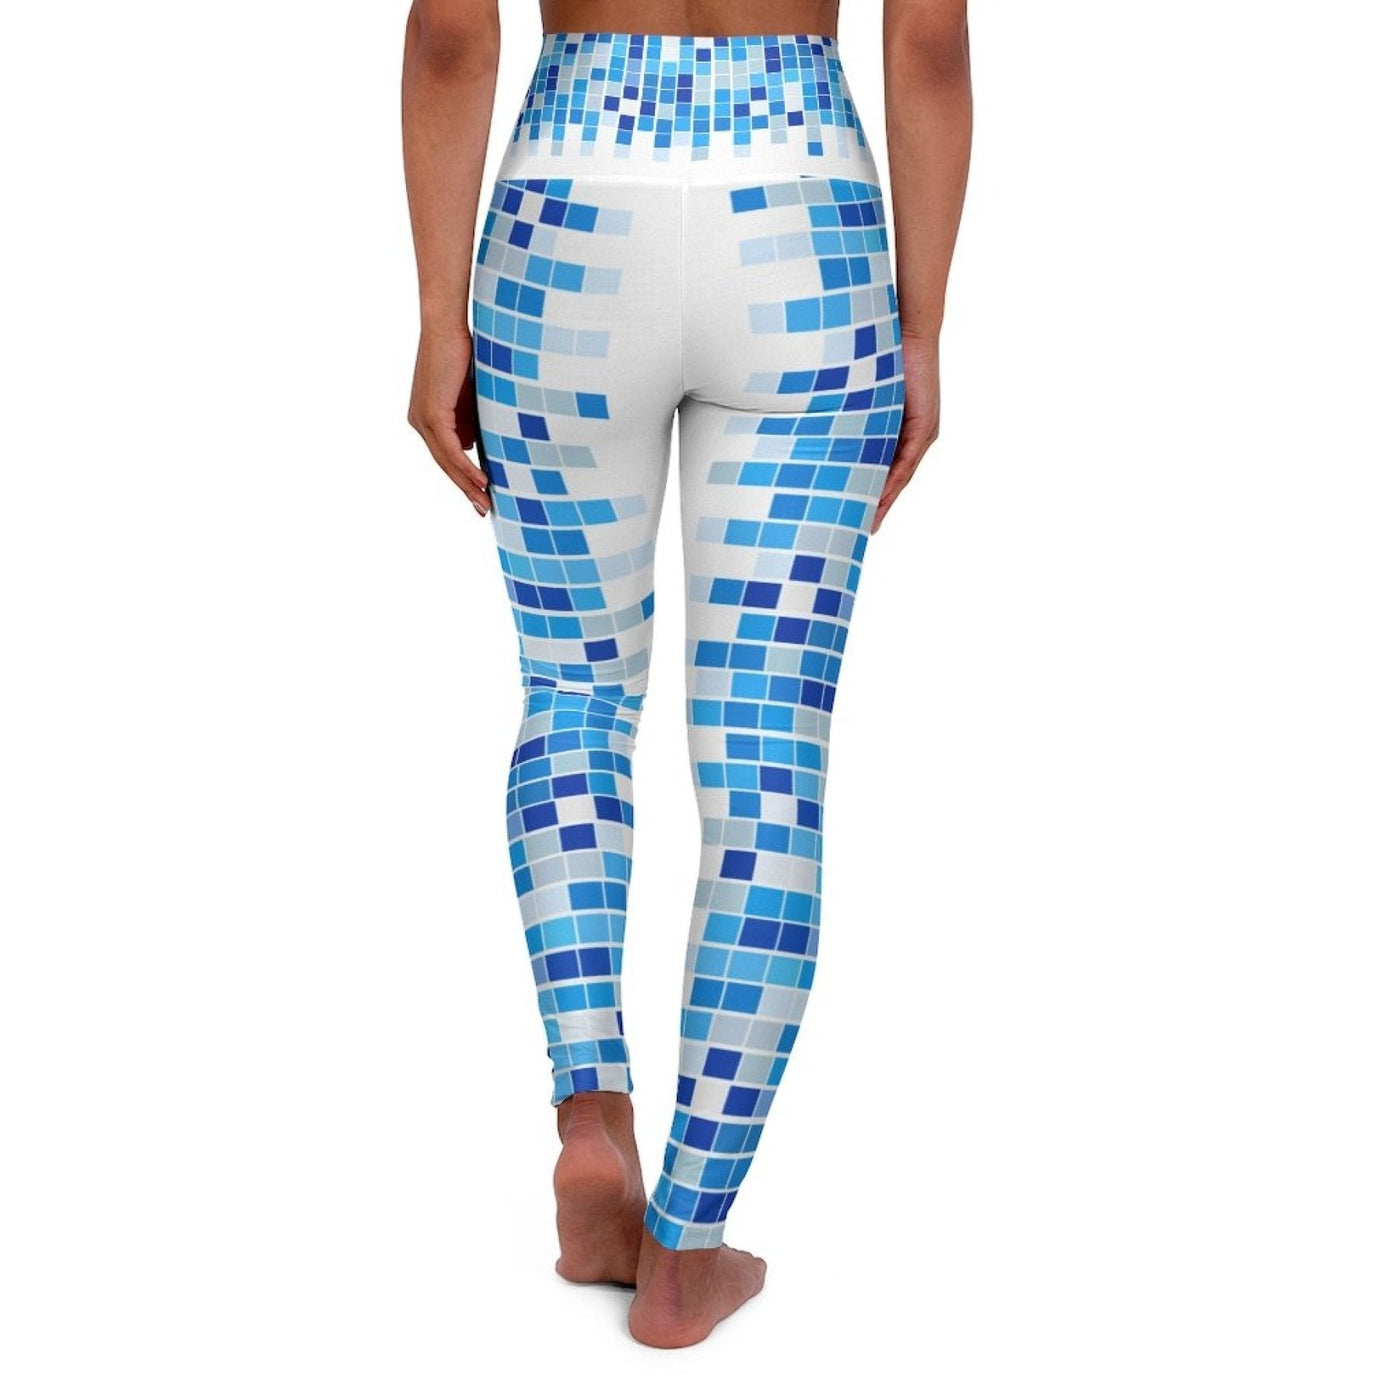 High Waisted Yoga Leggings Blue And White Mosaic Square Style Pants - Womens |